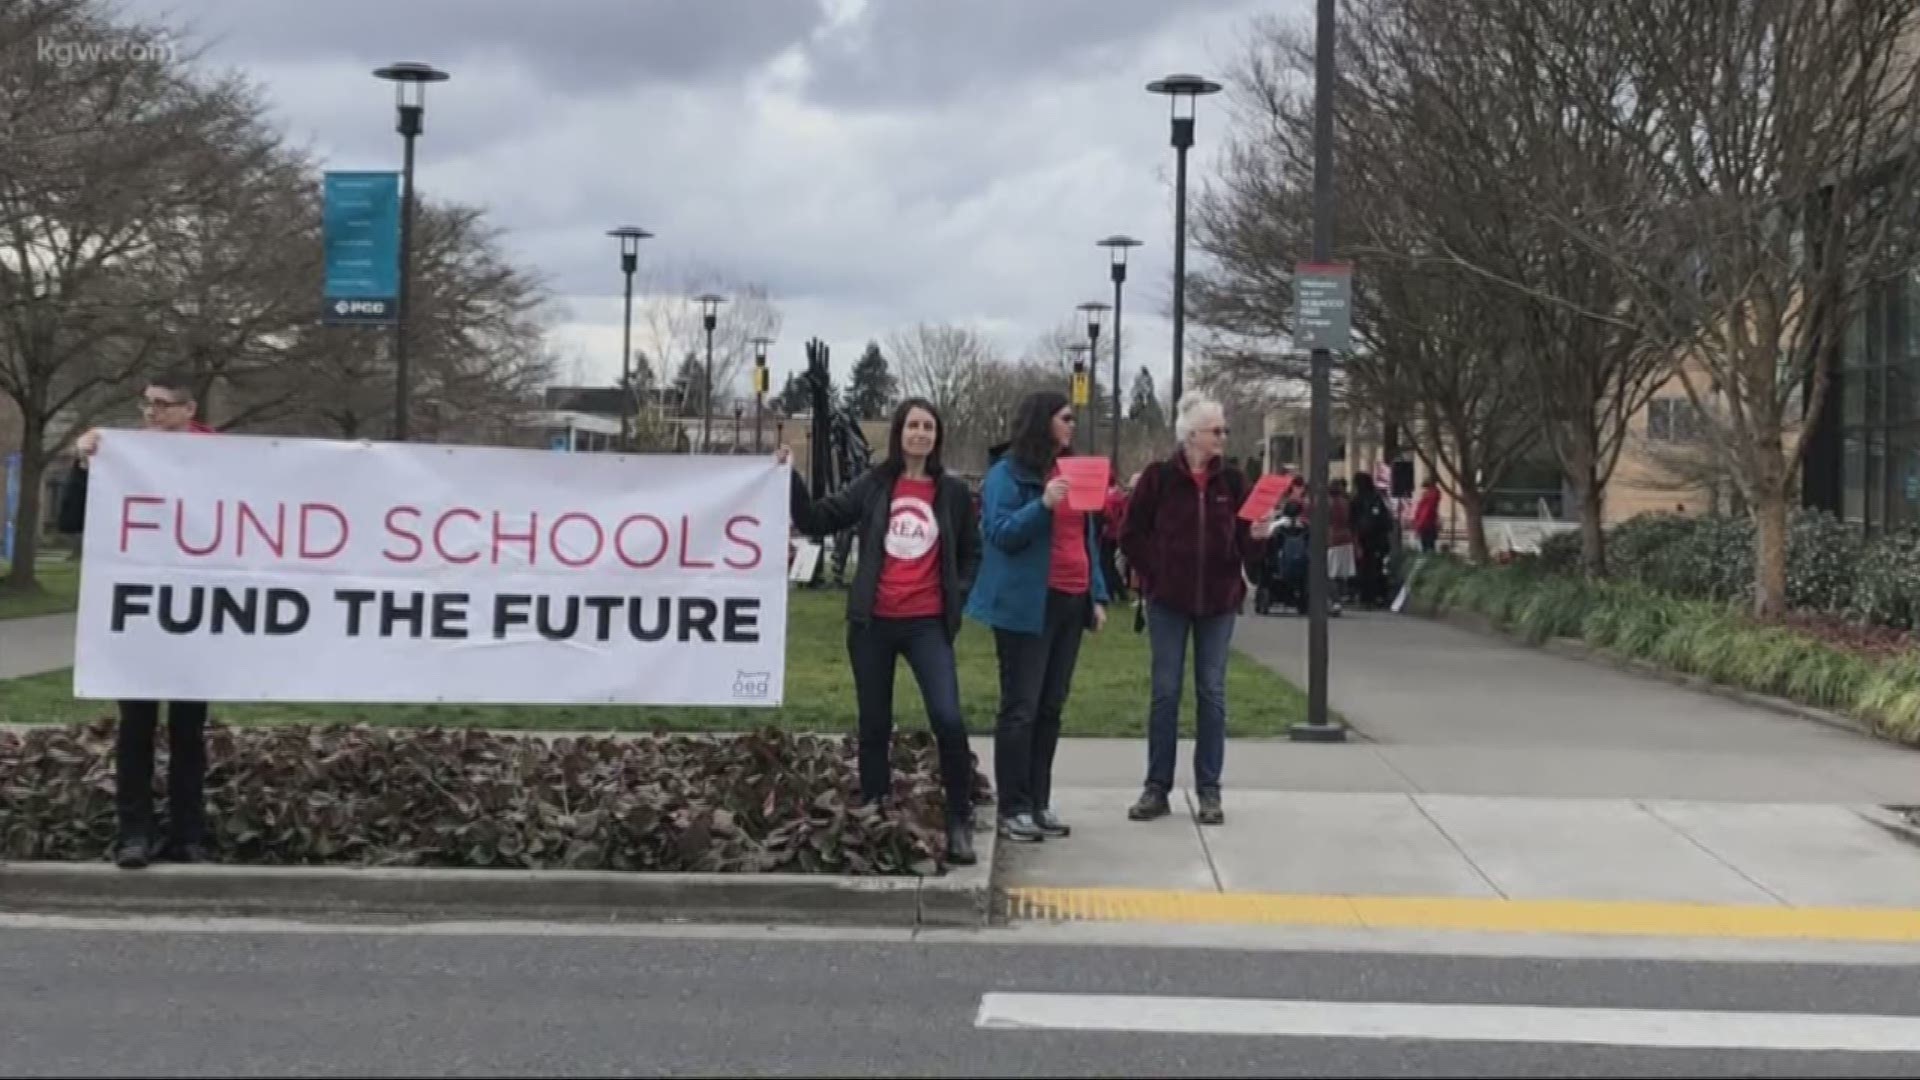 More than 60 people, clad in red, gathered at the Portland Community College Cascade campus to protest the proposed budget cuts in Oregon education.